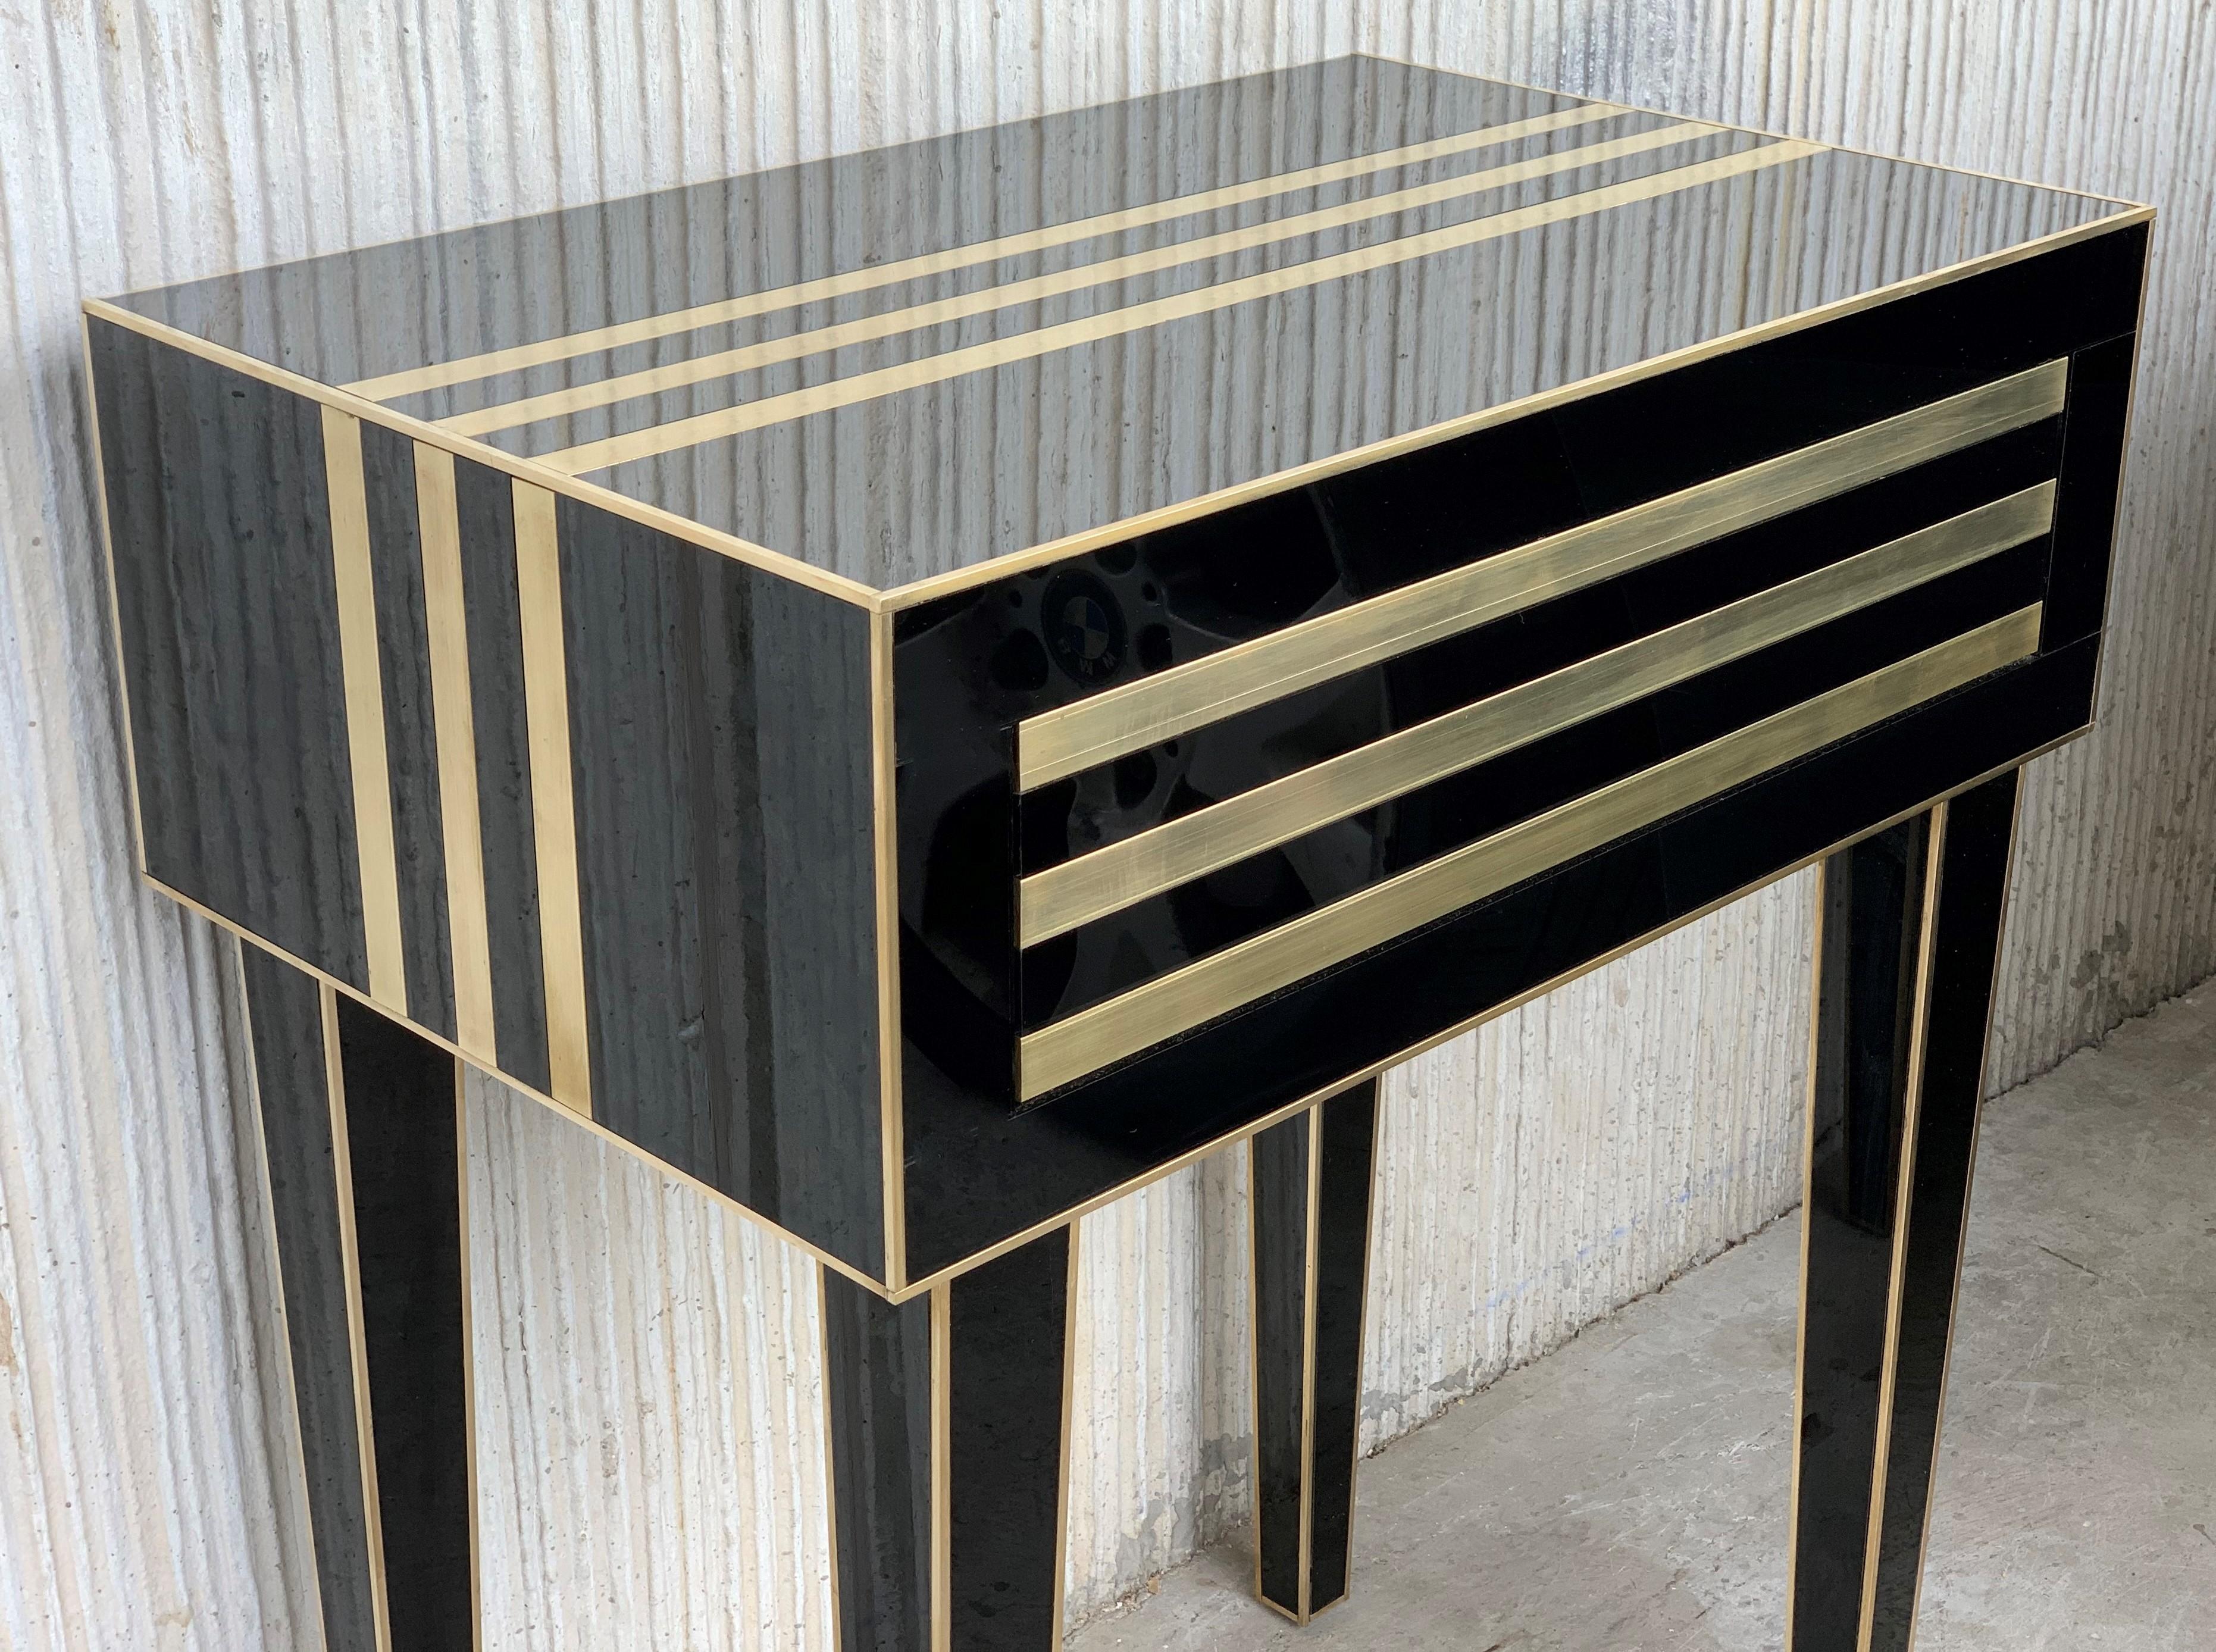 New Pair of High Black and Brass Nightstands with Drawer, Push System Opening 1